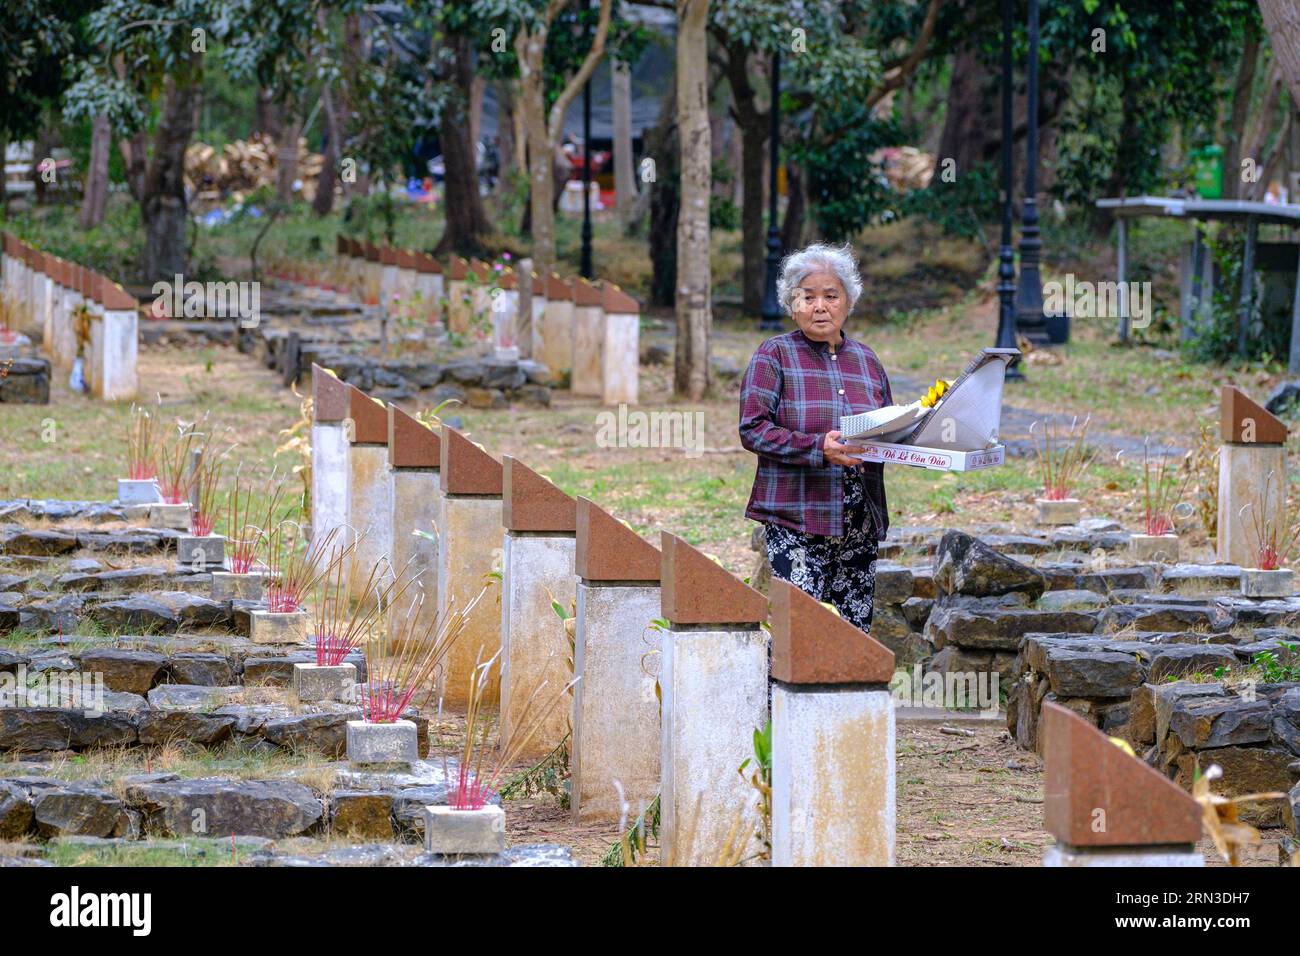 Vietnam, Archipelago of Con Dao, called Poulo-Condor islands during french colonisation, Con Son island, Hang Duong cemetary Stock Photo